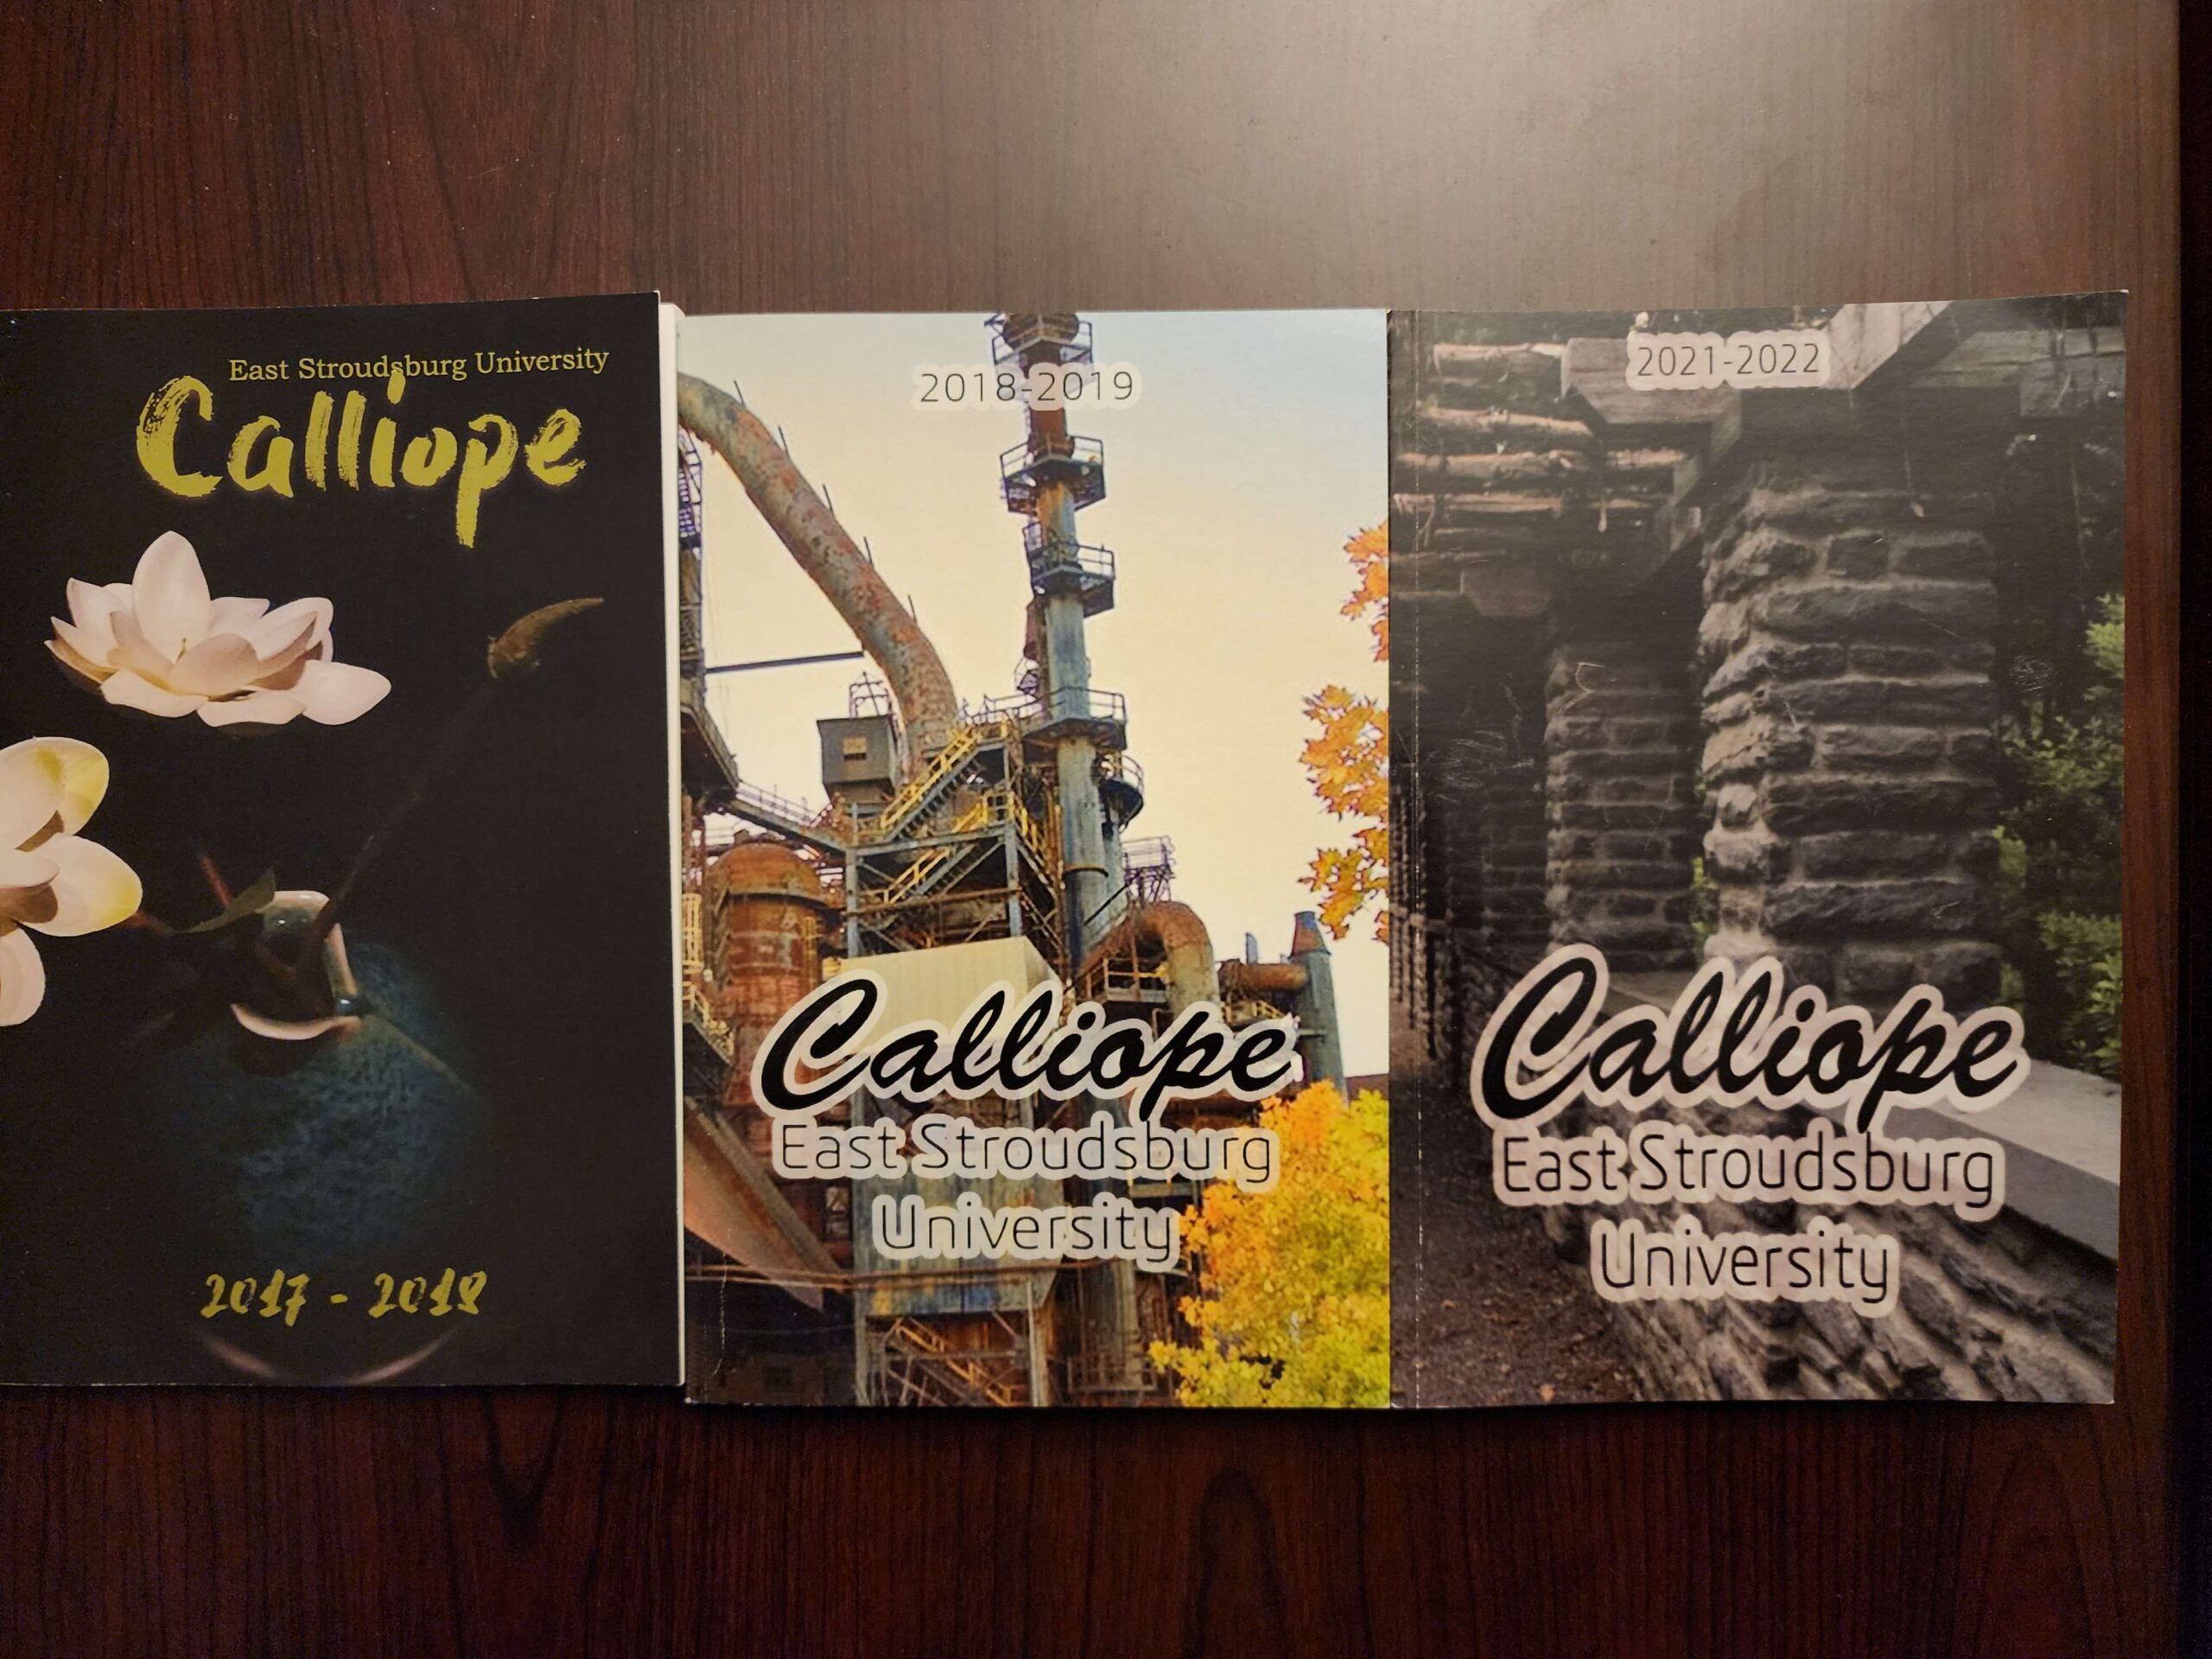 Three issues of the Calliope: 2017-18, 2018-19, 2021-22